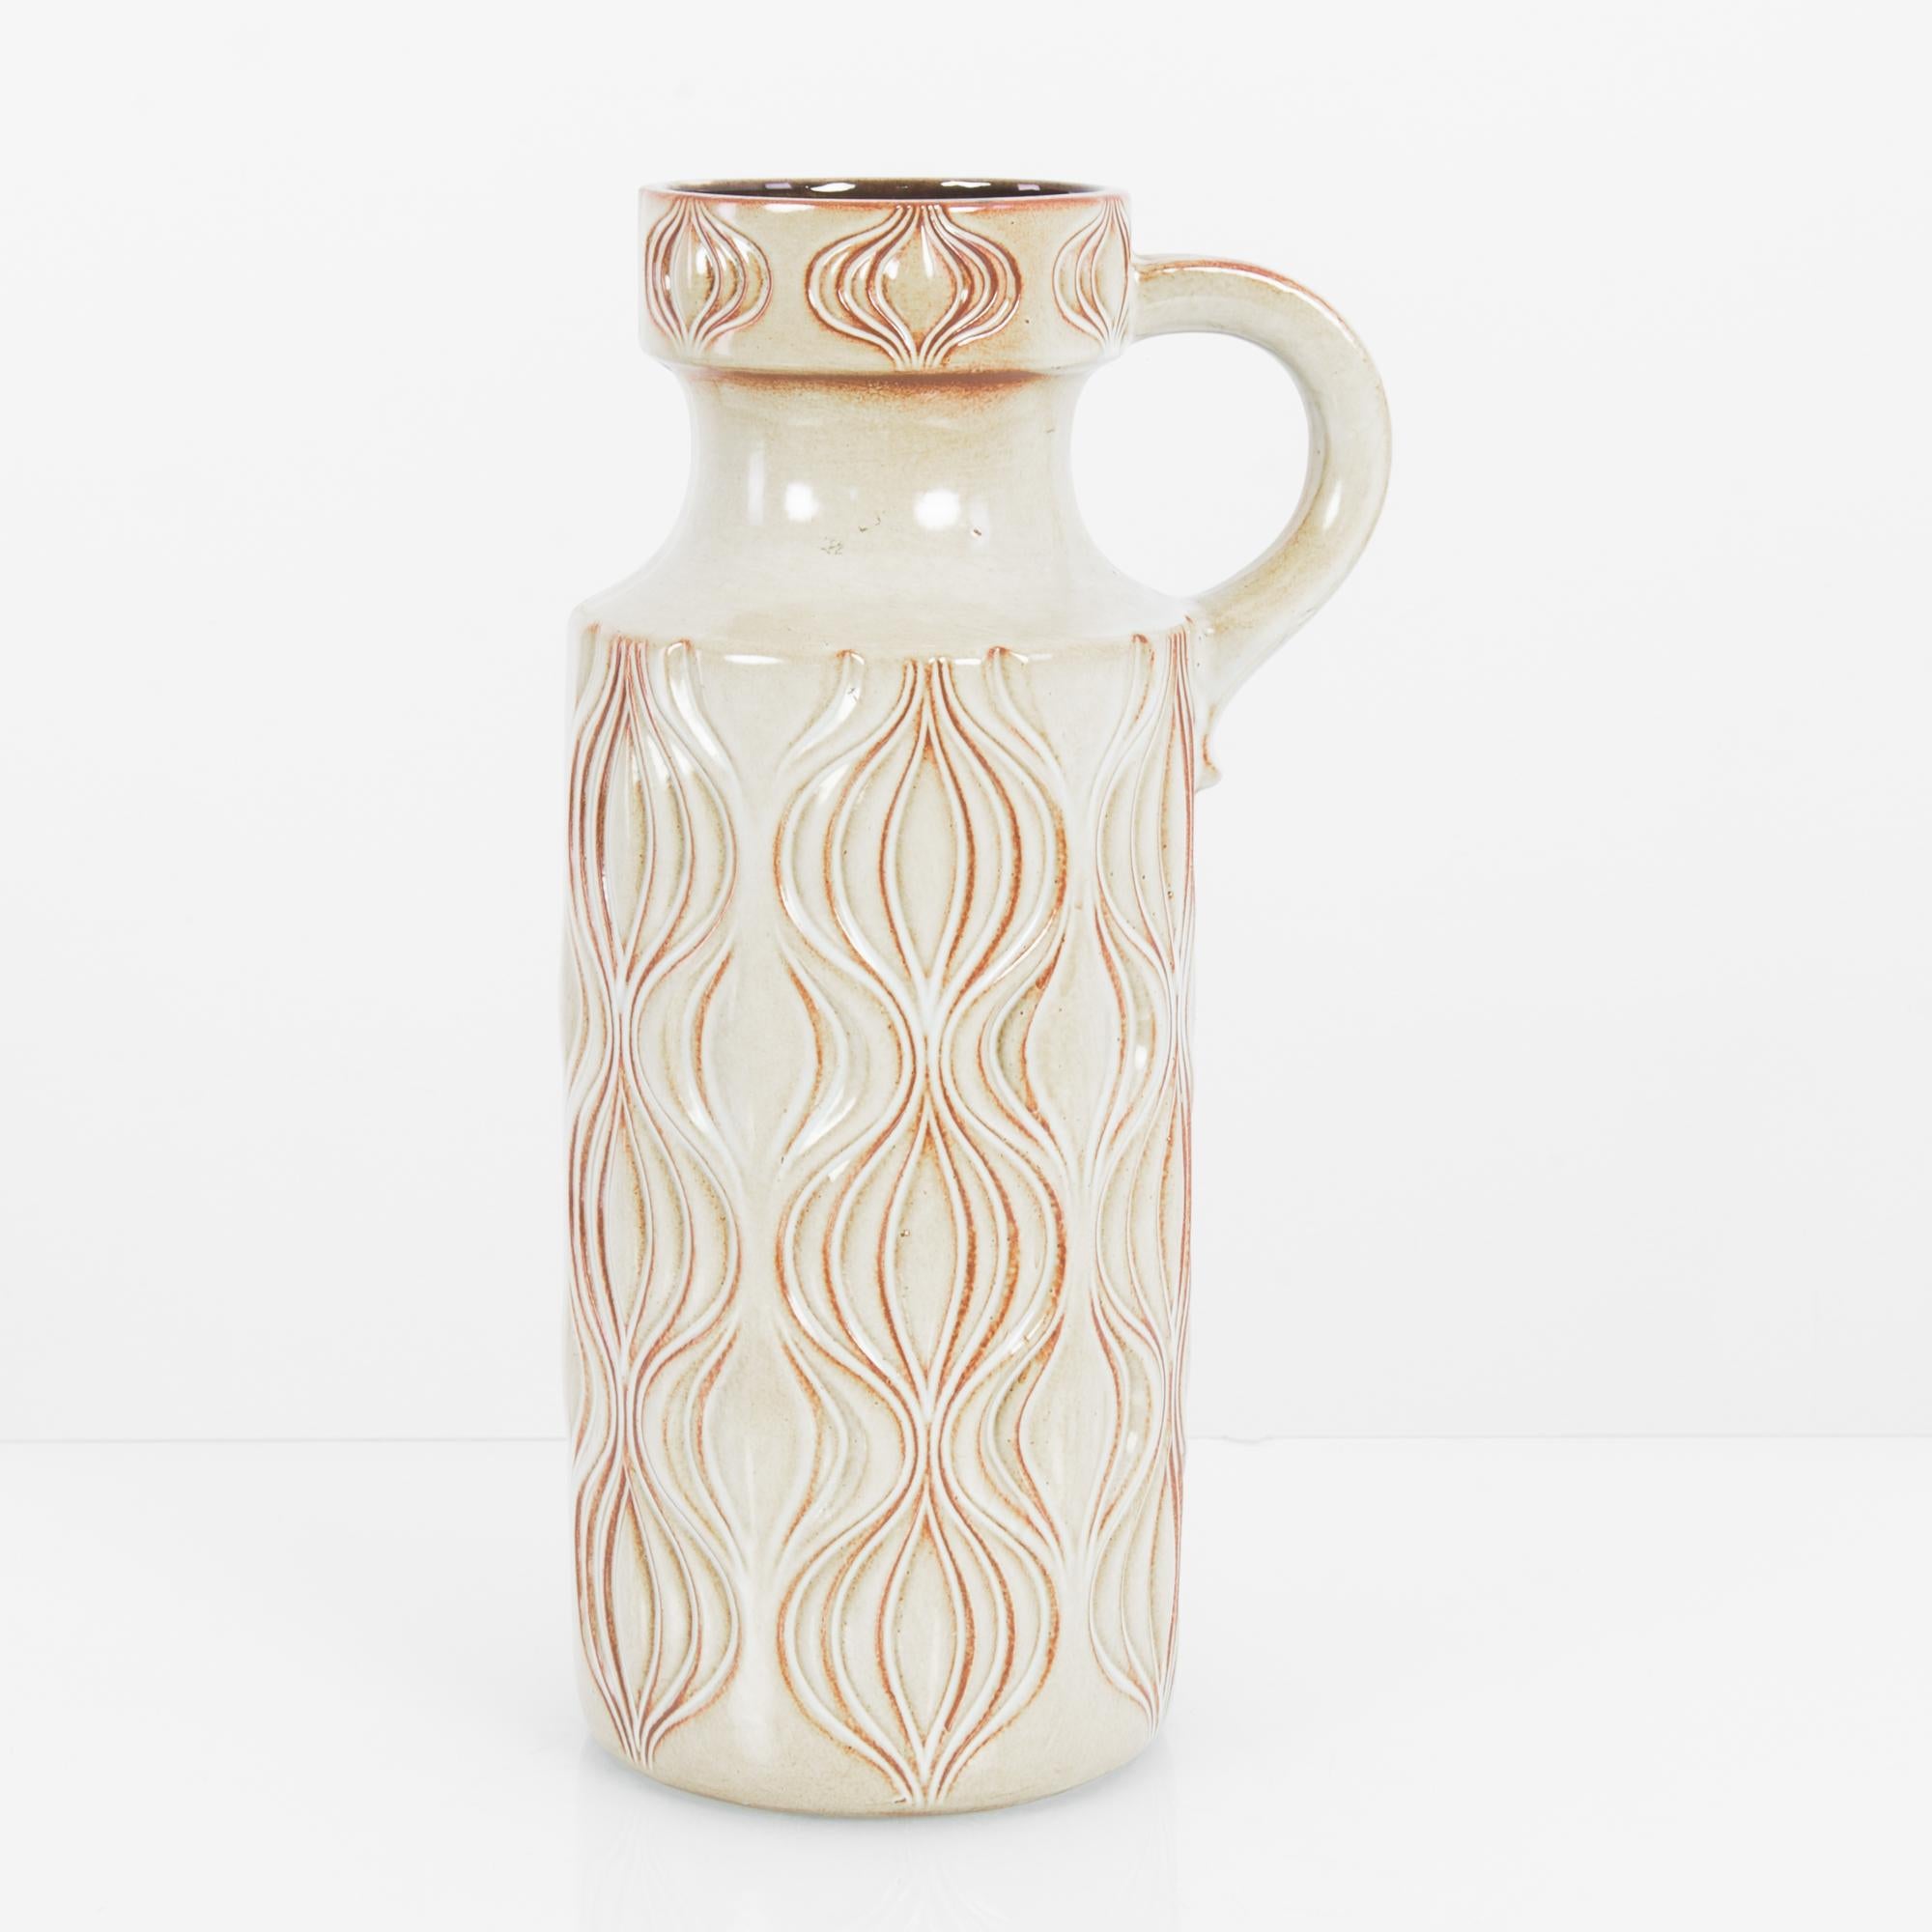 A ceramic vase from West Germany, circa 1960. An upright flask of white ceramic is decorated with a raised pattern, rippling and fluid, reminiscent of onion bulbs or tulips. The raised lines bear a soft tint of rosy orange, a warm shadow which